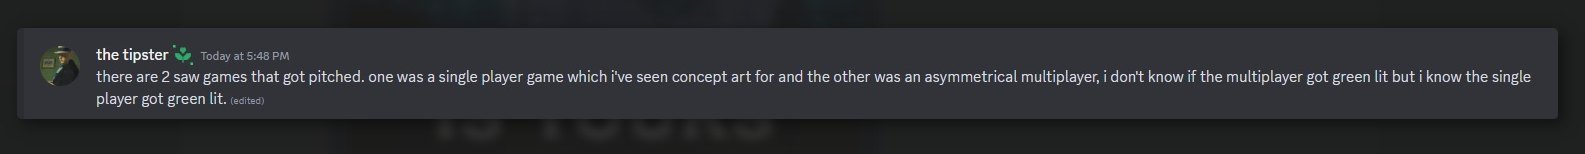 Discord Message From The Tipster